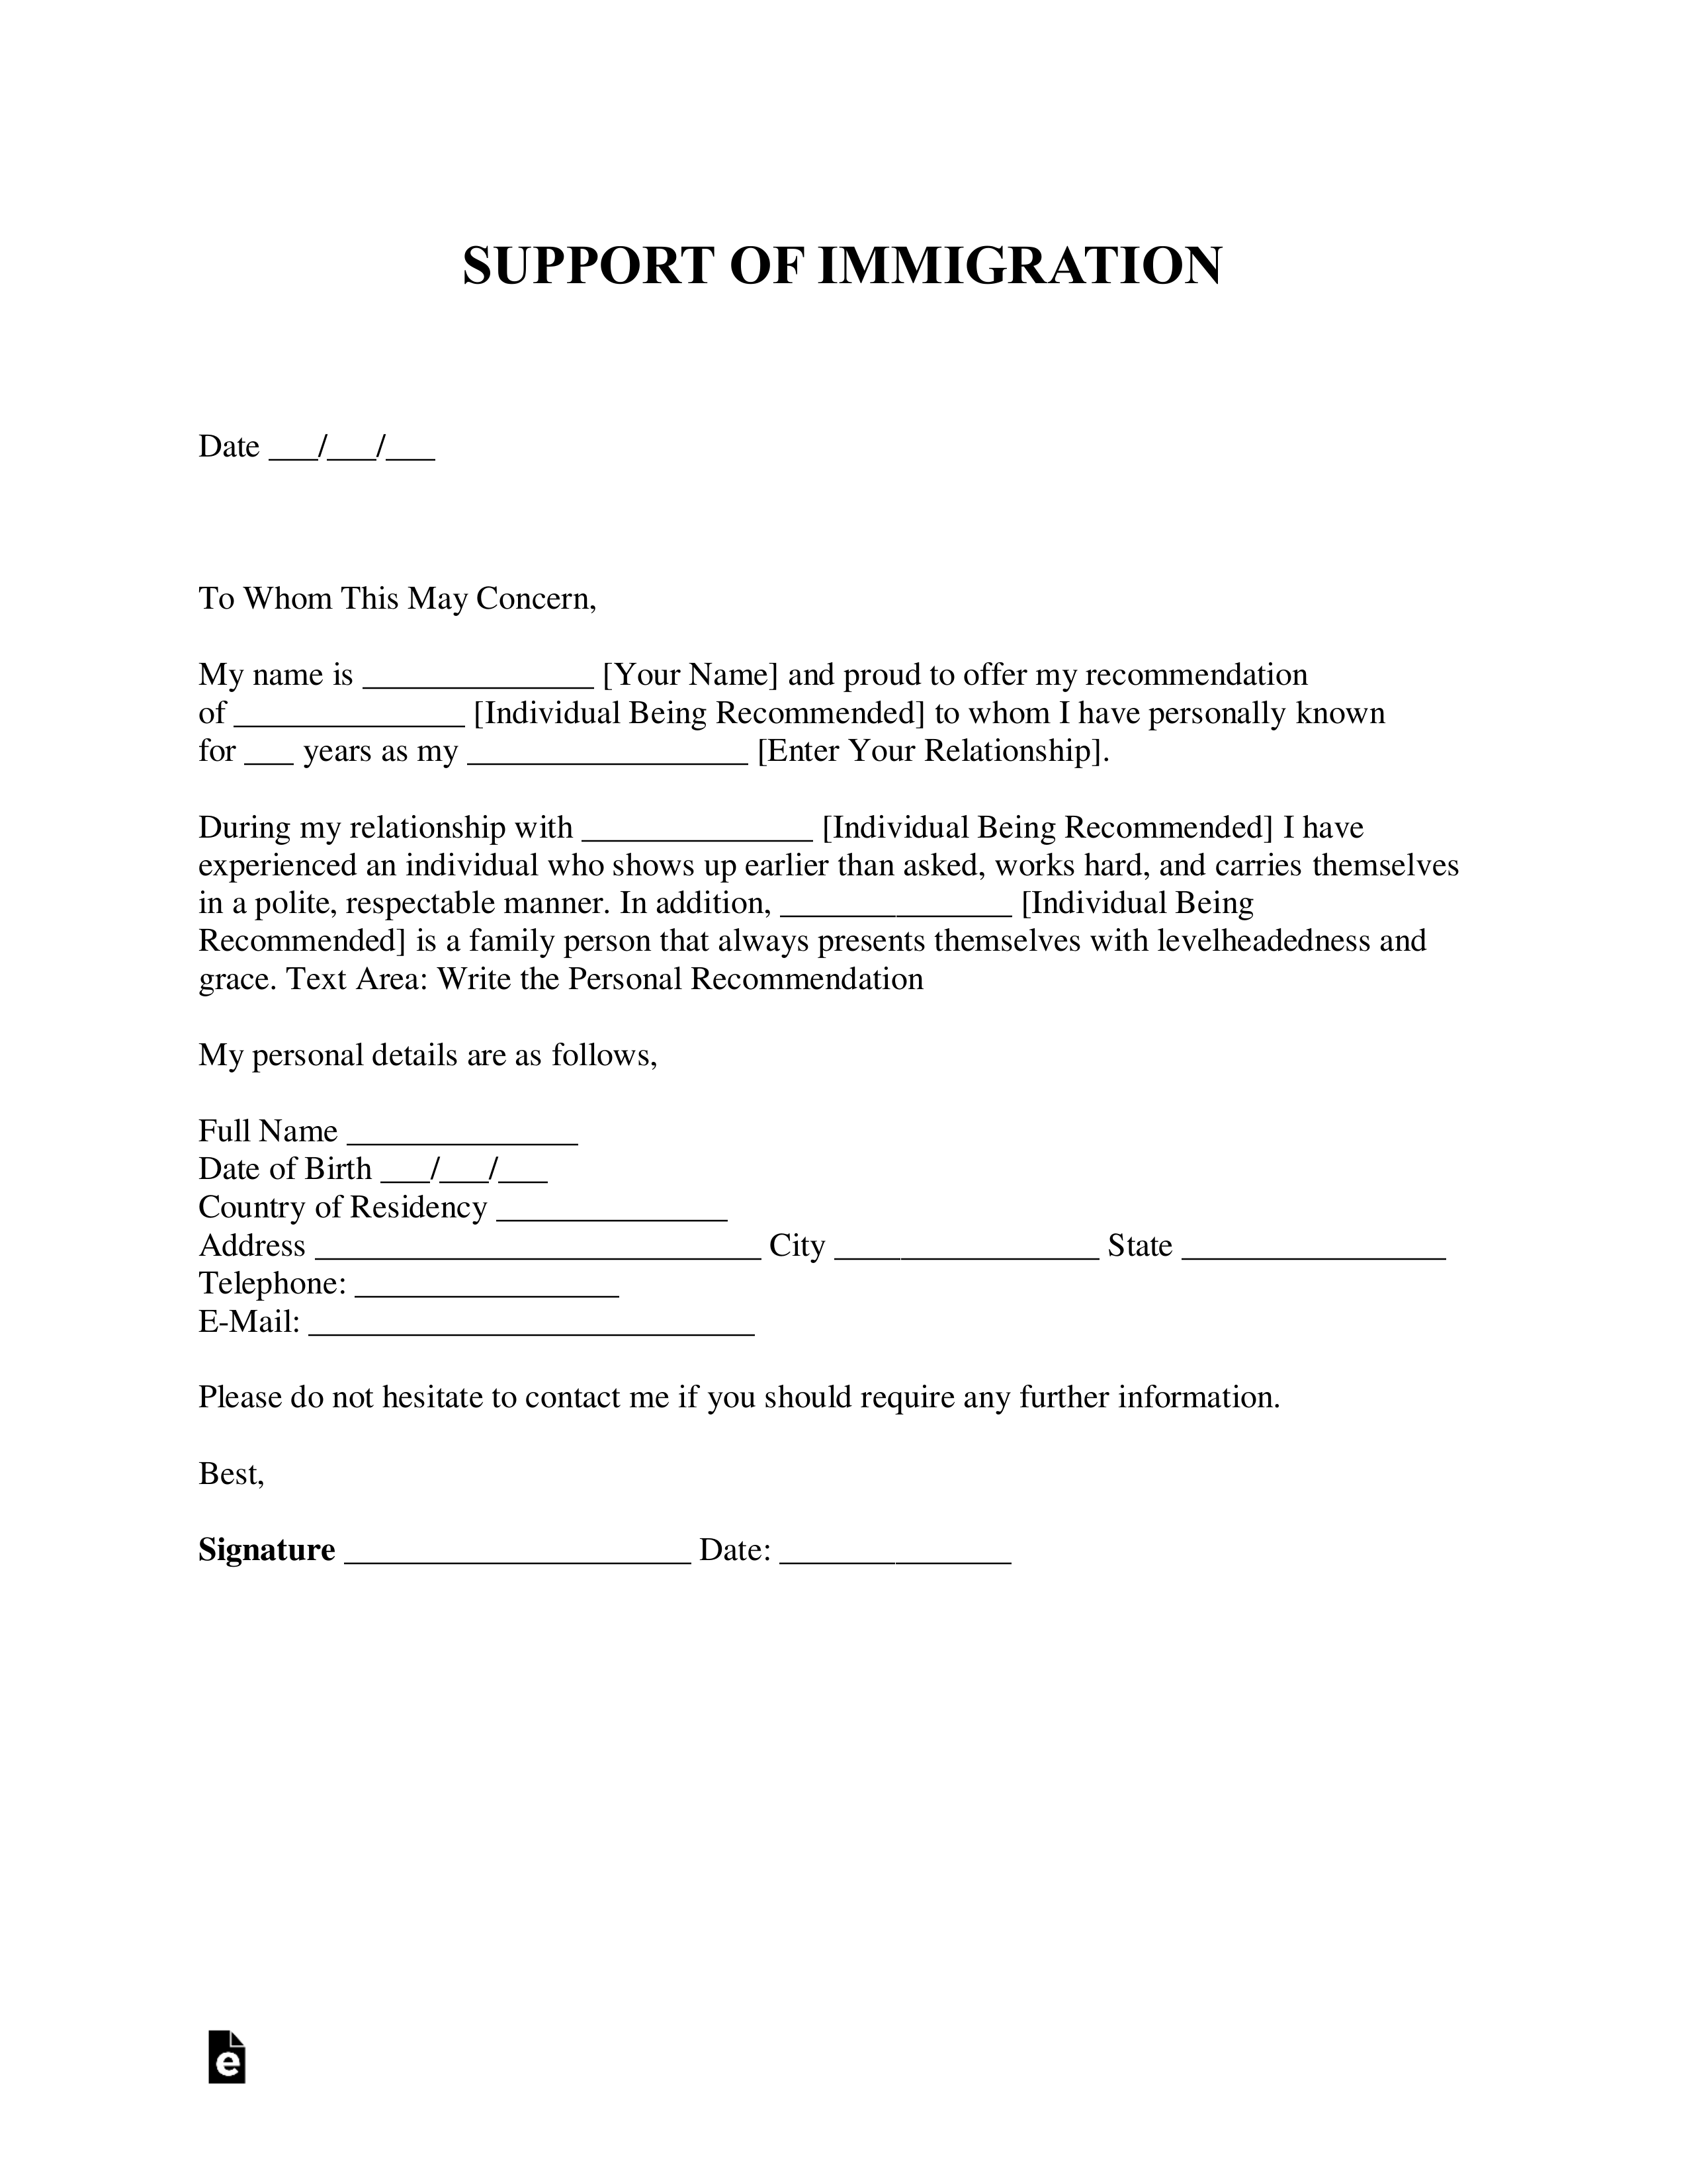 Letter For Immigration For Family from eforms.com